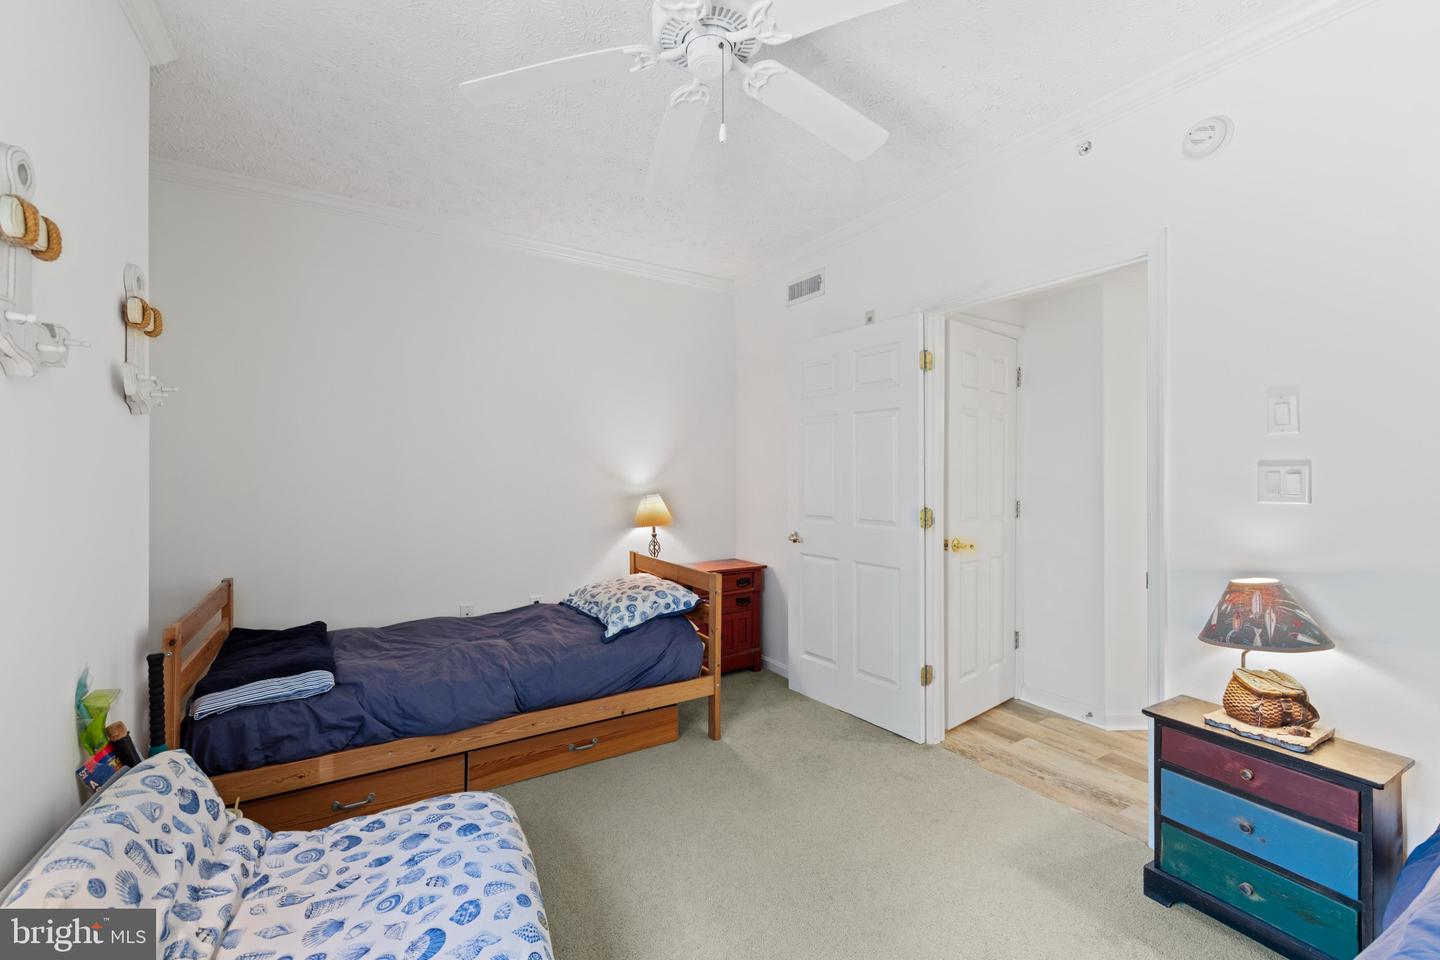 MDWO2015322-802986556172-2024-04-16-15-31-31 14 45th St #203 | Ocean City, MD Real Estate For Sale | MLS# Mdwo2015322  - 1st Choice Properties